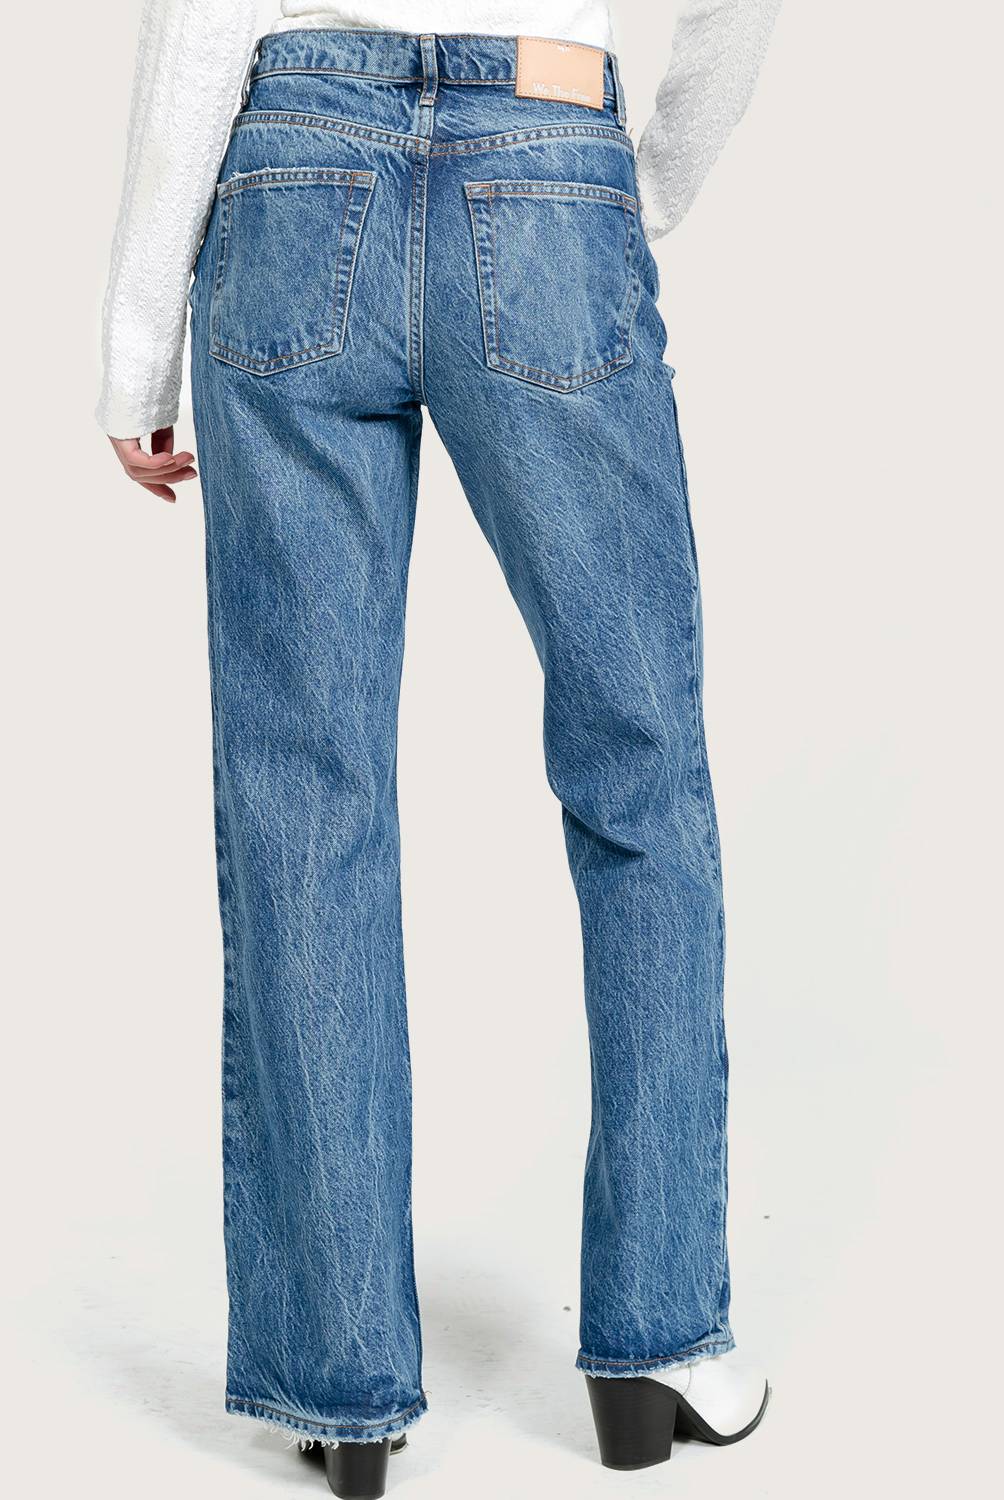 FREE PEOPLE - Jeans Mujer